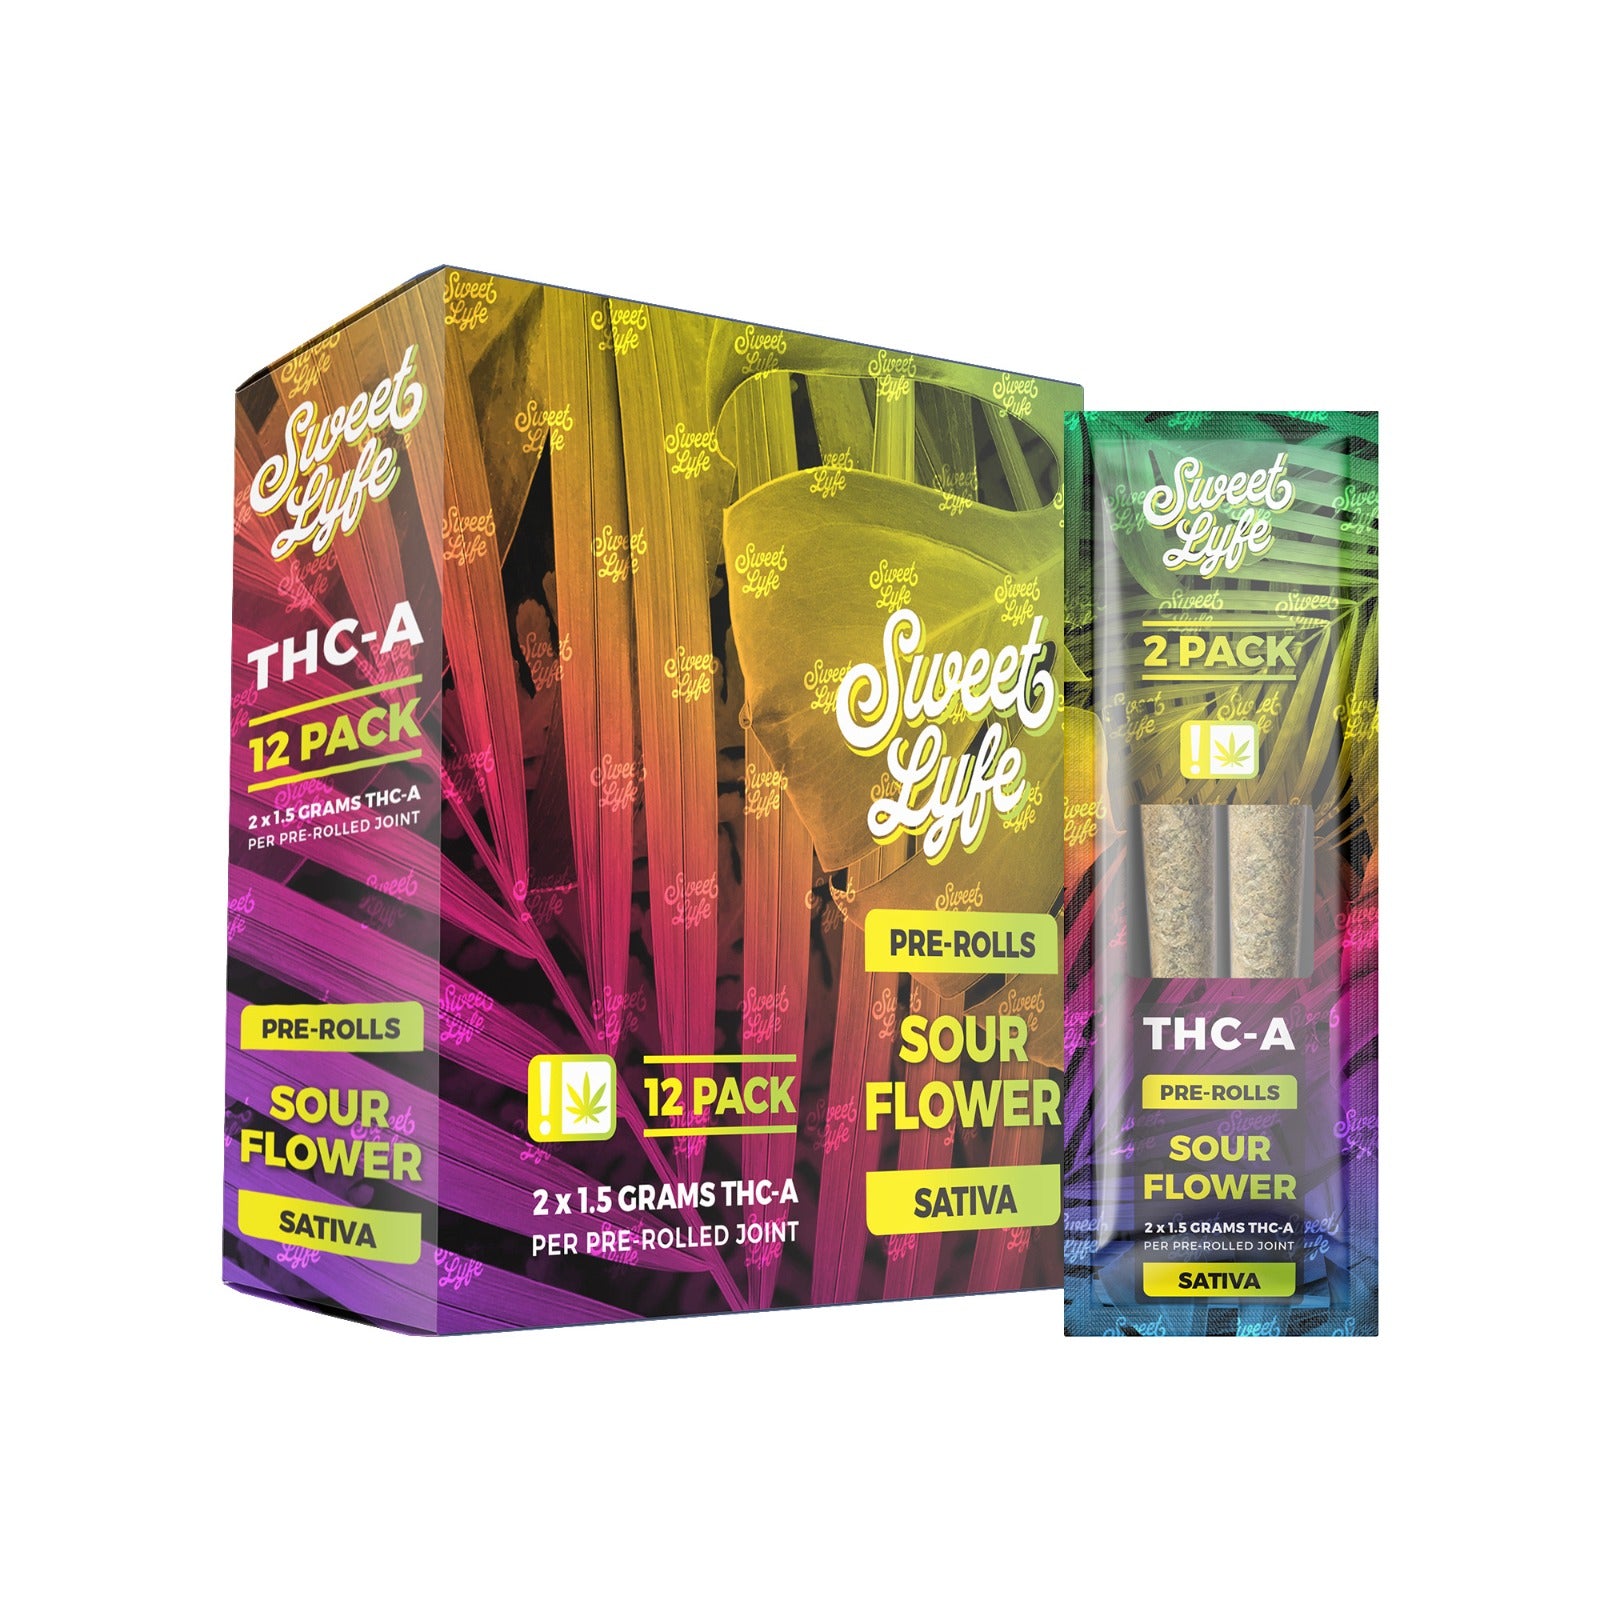 2 Pack Pre-Rolls Joint THC-A|Sour Flower - Sativa